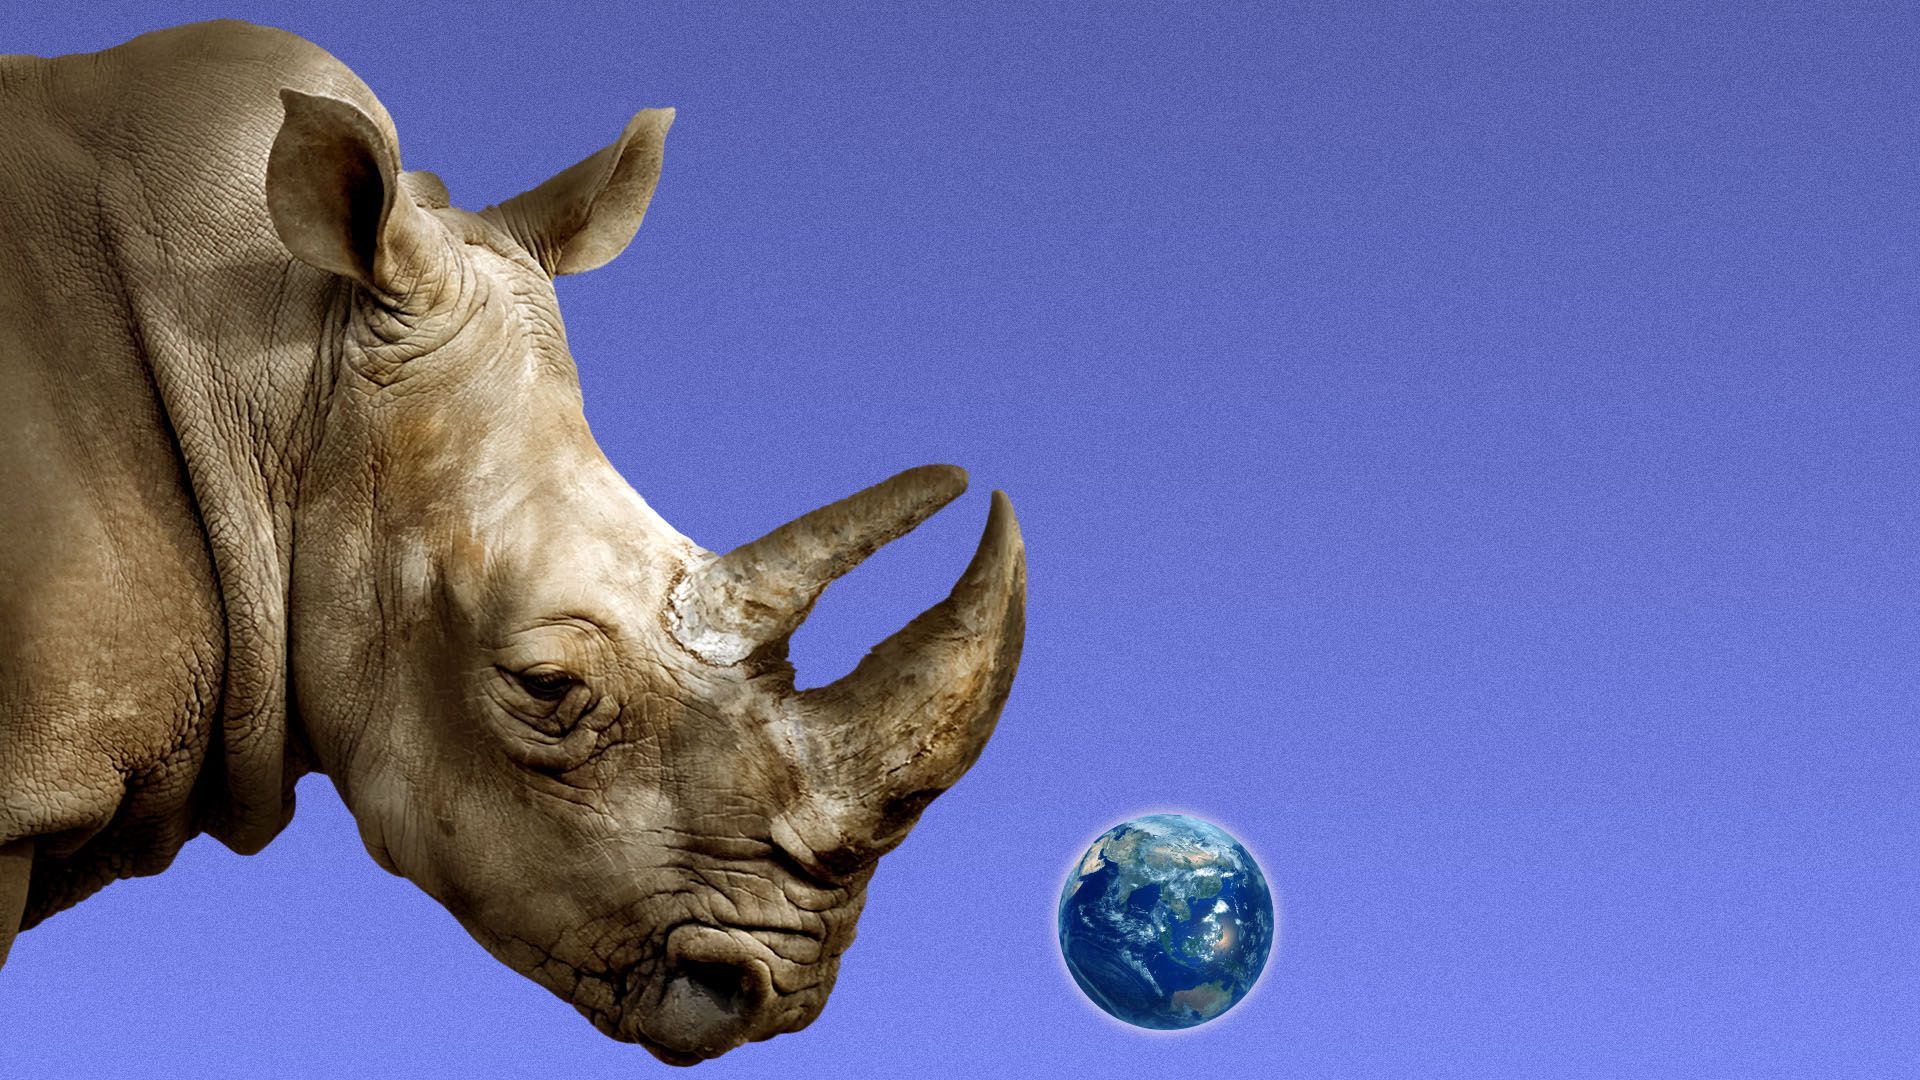 Illustration of a giant rhino facing a tiny earth